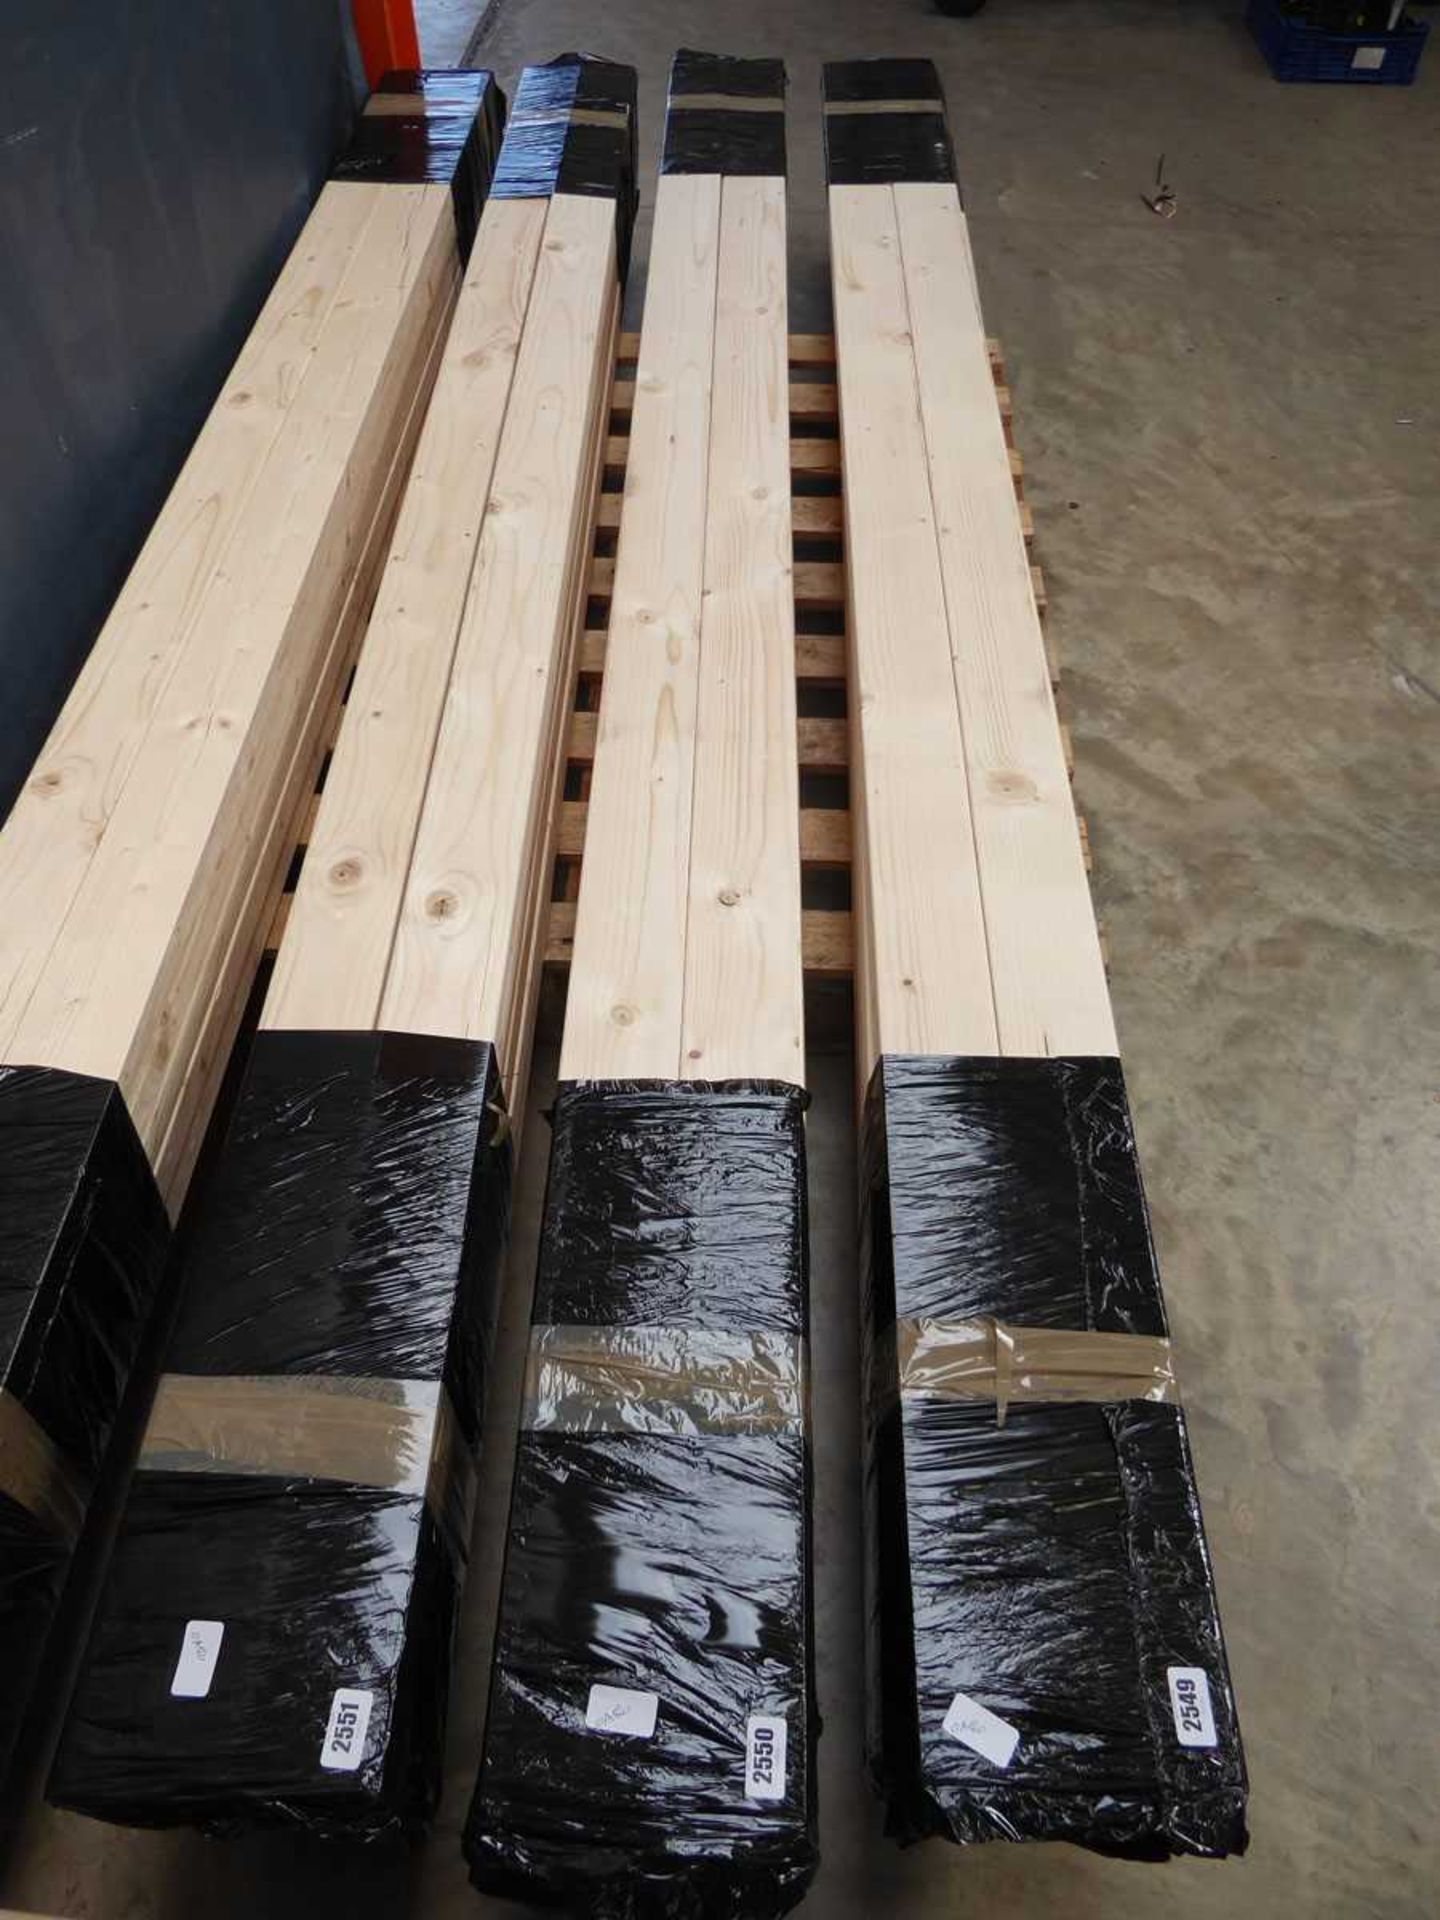 10 2x4 lengths of CLS timber (2.4m)